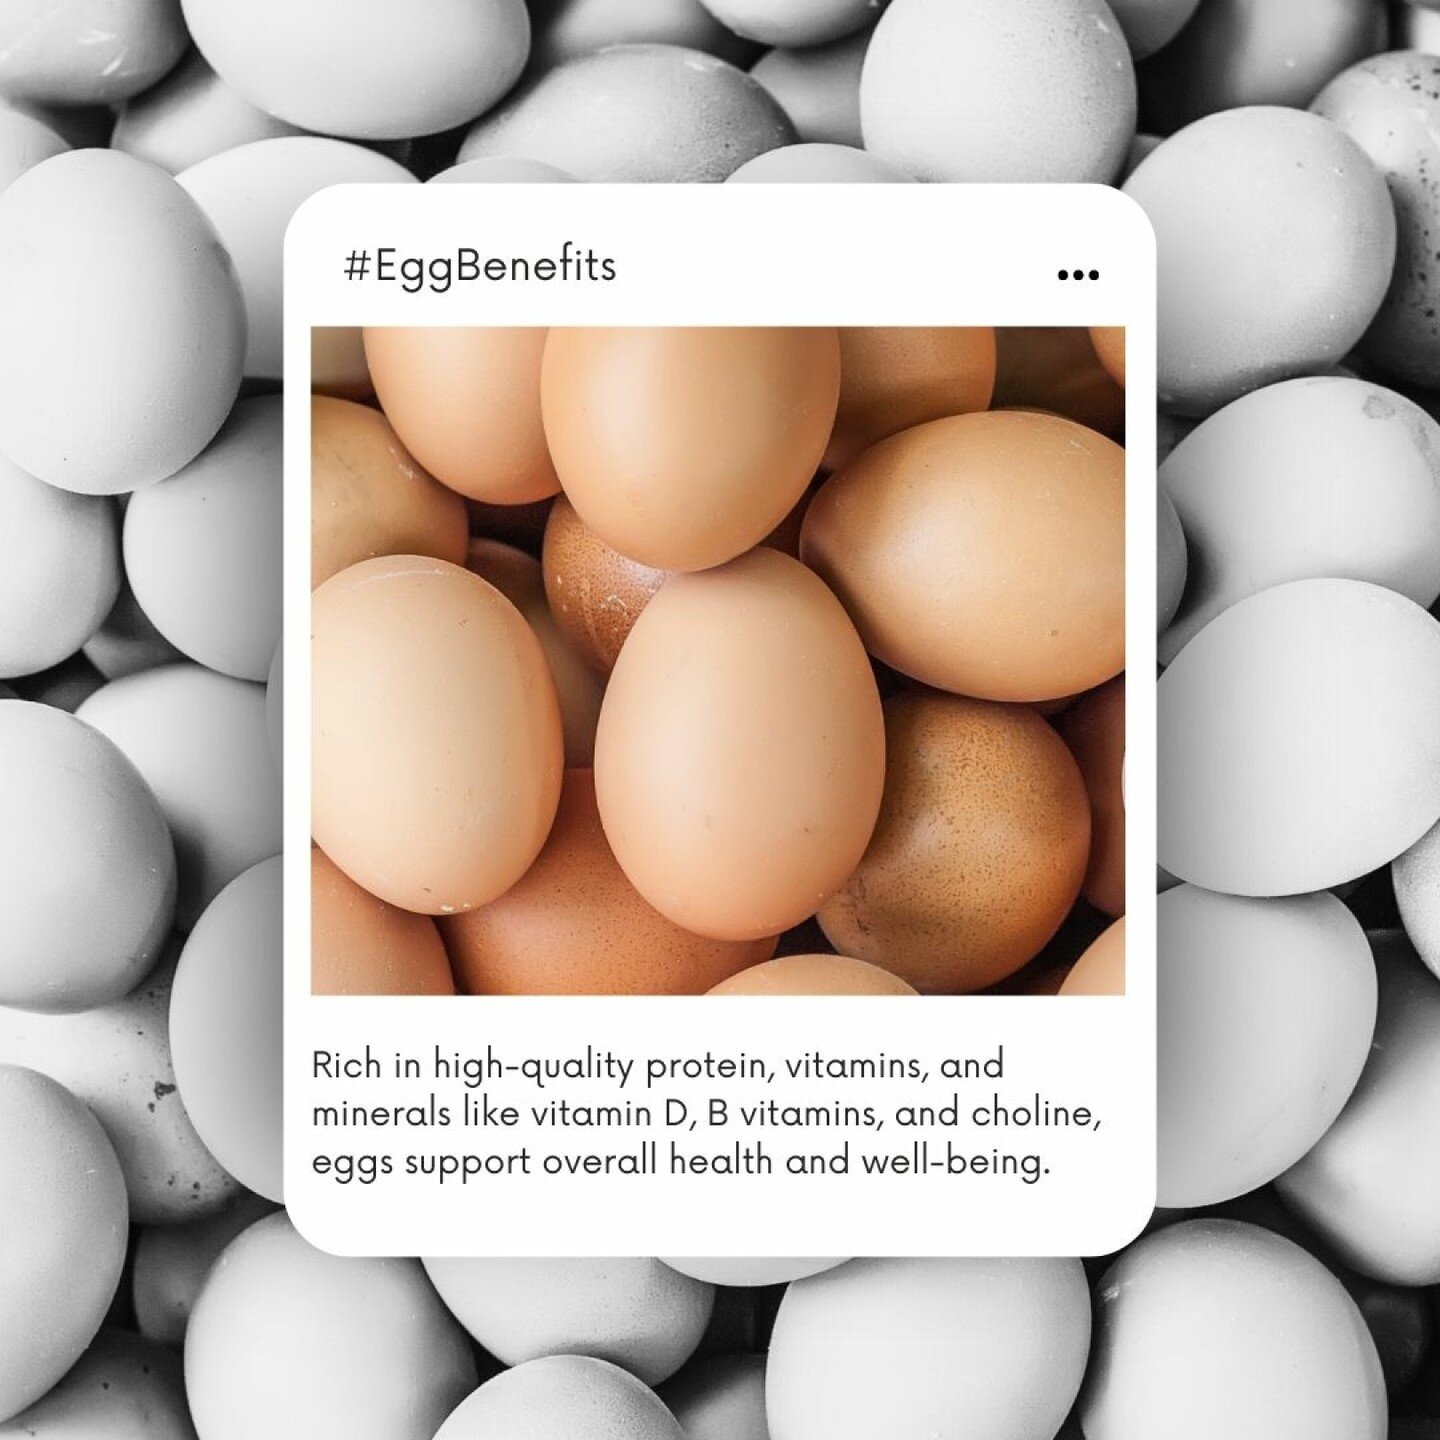 🥚Egg-cellent News! 

🥚This Easter, let's crack the misconception about eggs!

🥚Despite their bad rap for cholesterol, eggs are a nutrient powerhouse that deserves a spot on your plate.

🥚Rich in high-quality protein, vitamins, and minerals like v